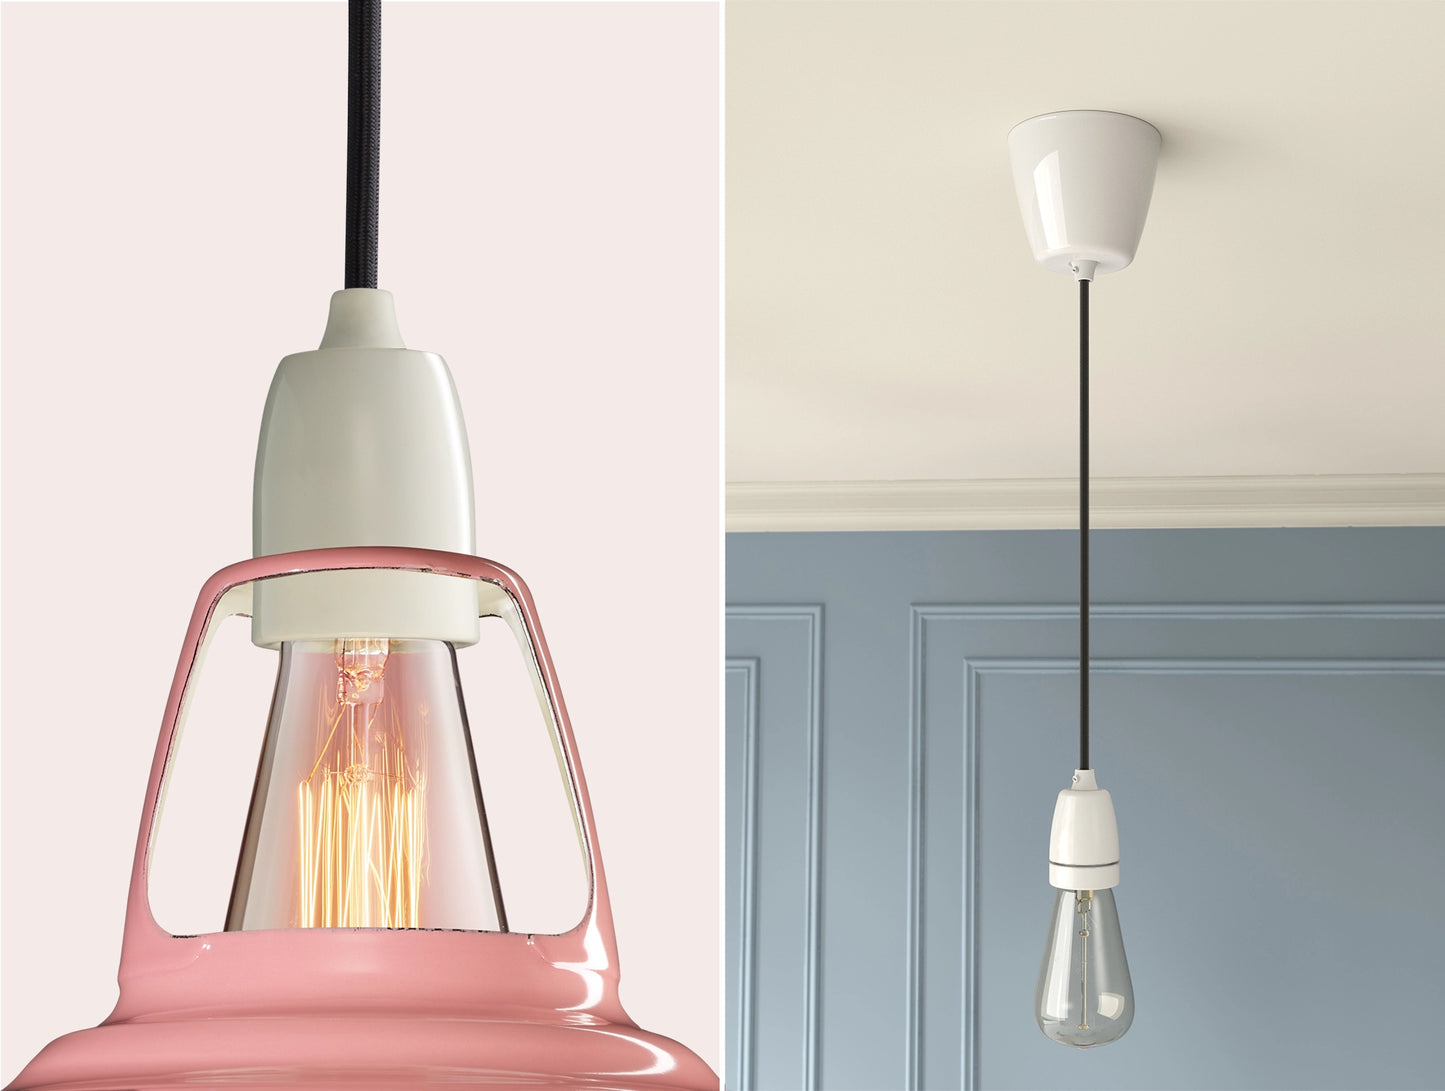 Close up of an E27 Porcelain suspension set on a Powder Pink lampshade on the left. On the right, an E27 Porcelain pendant set with a lightbulb is hanging from the ceiling